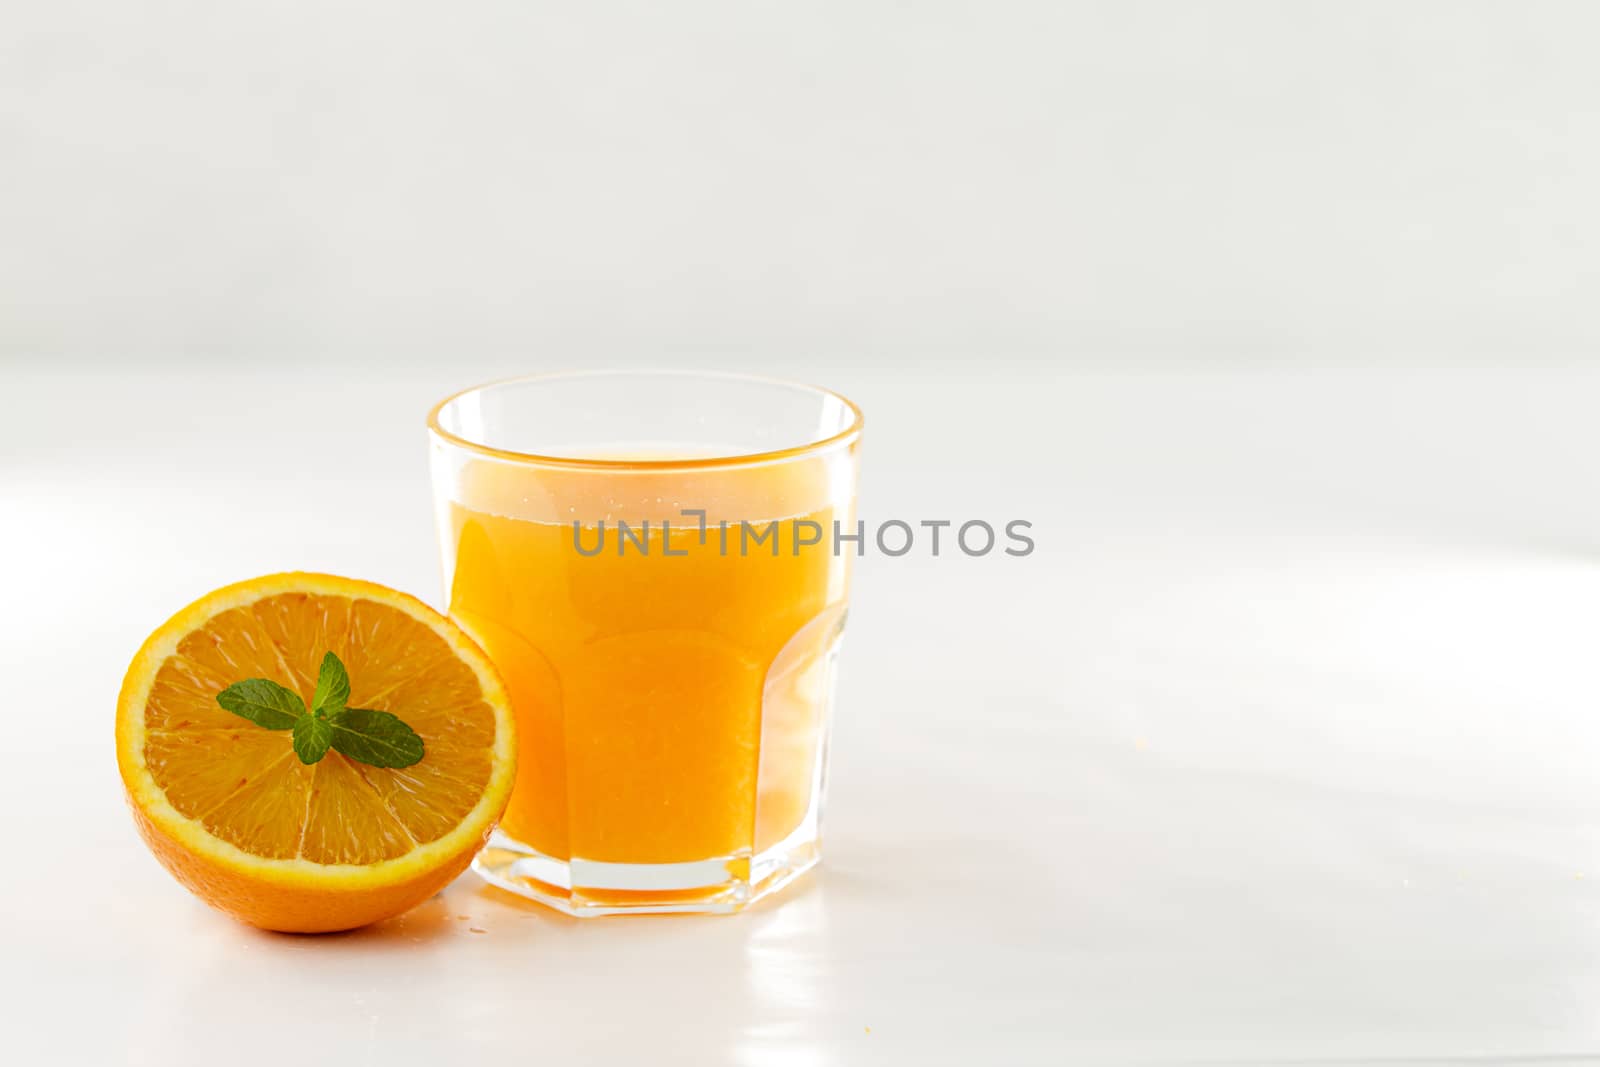 An inviting glass full of orange juice and a half one with a fre by robbyfontanesi